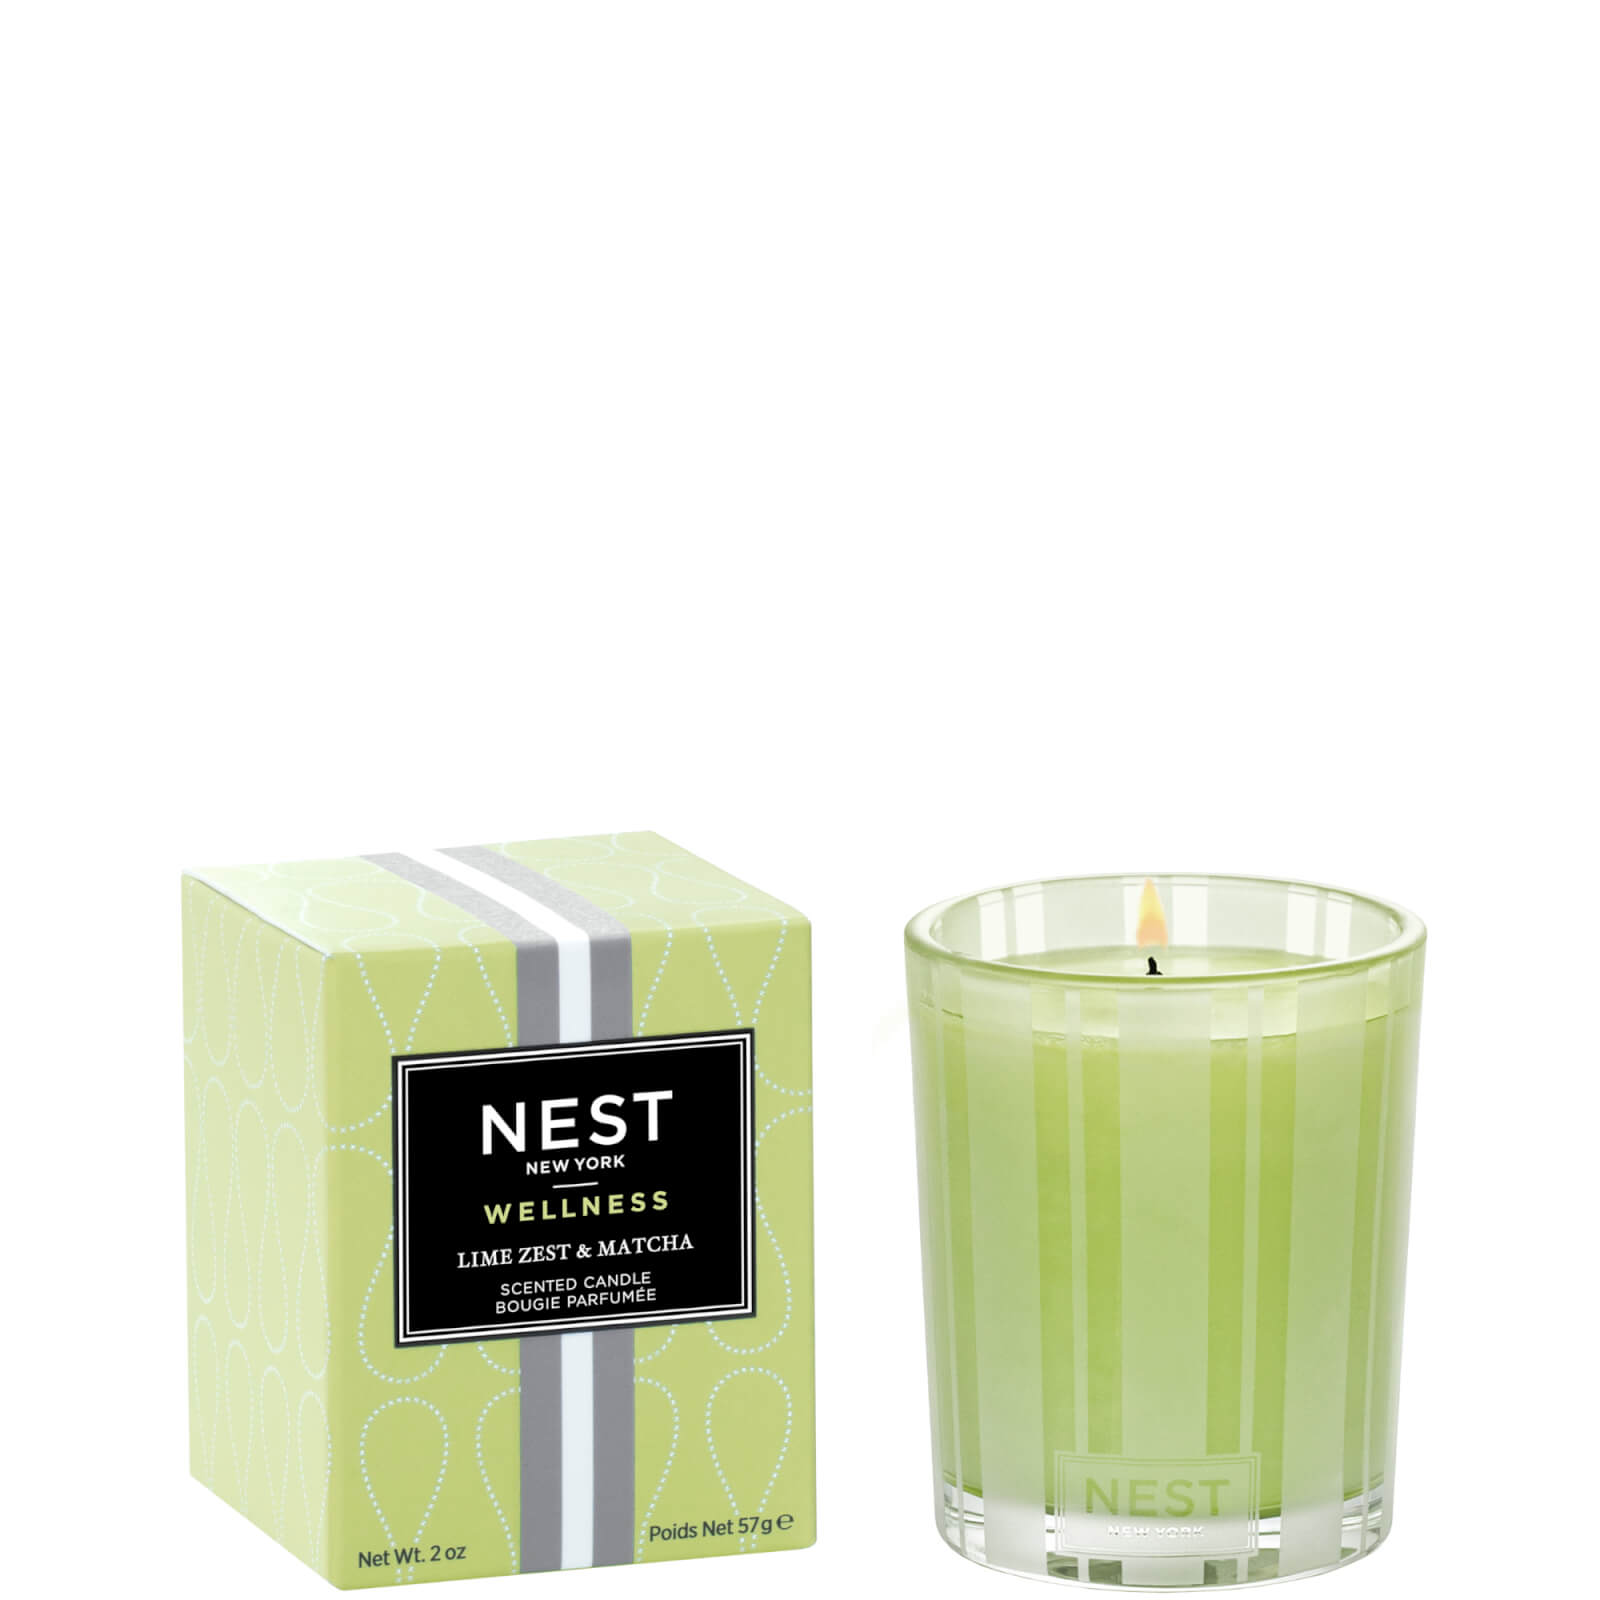 Nest New York Lime Zest And Matcha Votive Candle 70g In Lime Zest & Matcha